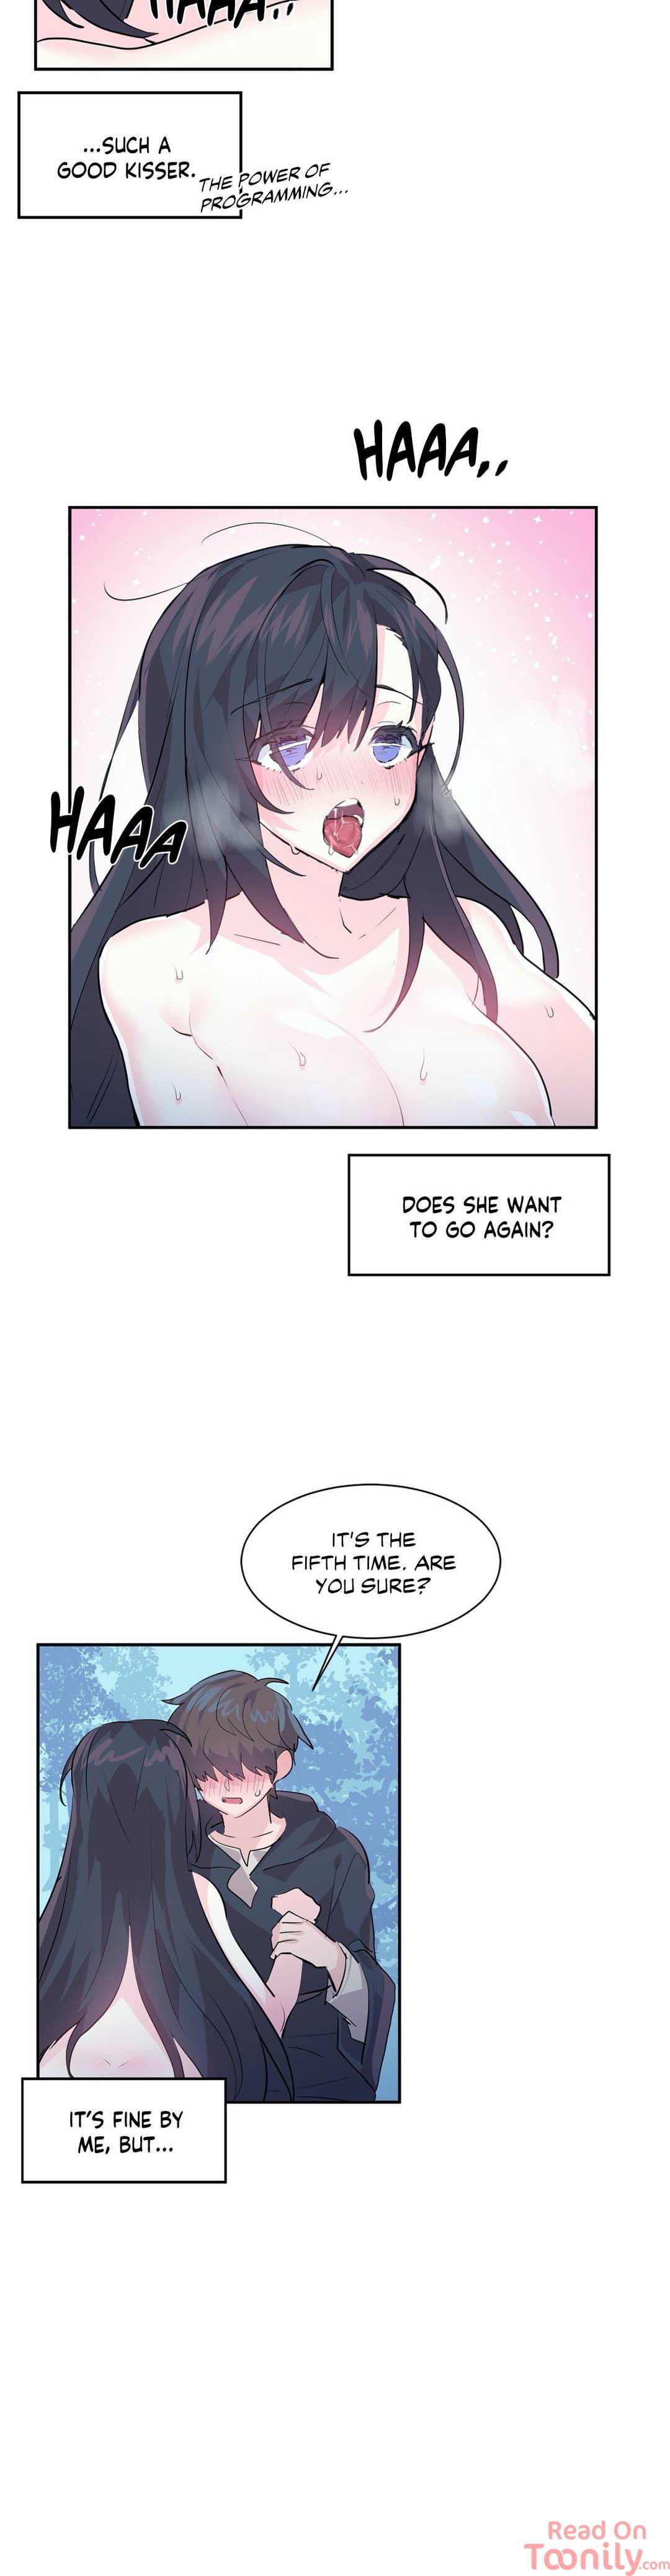 log-in-to-lust-a-land-chap-3-5